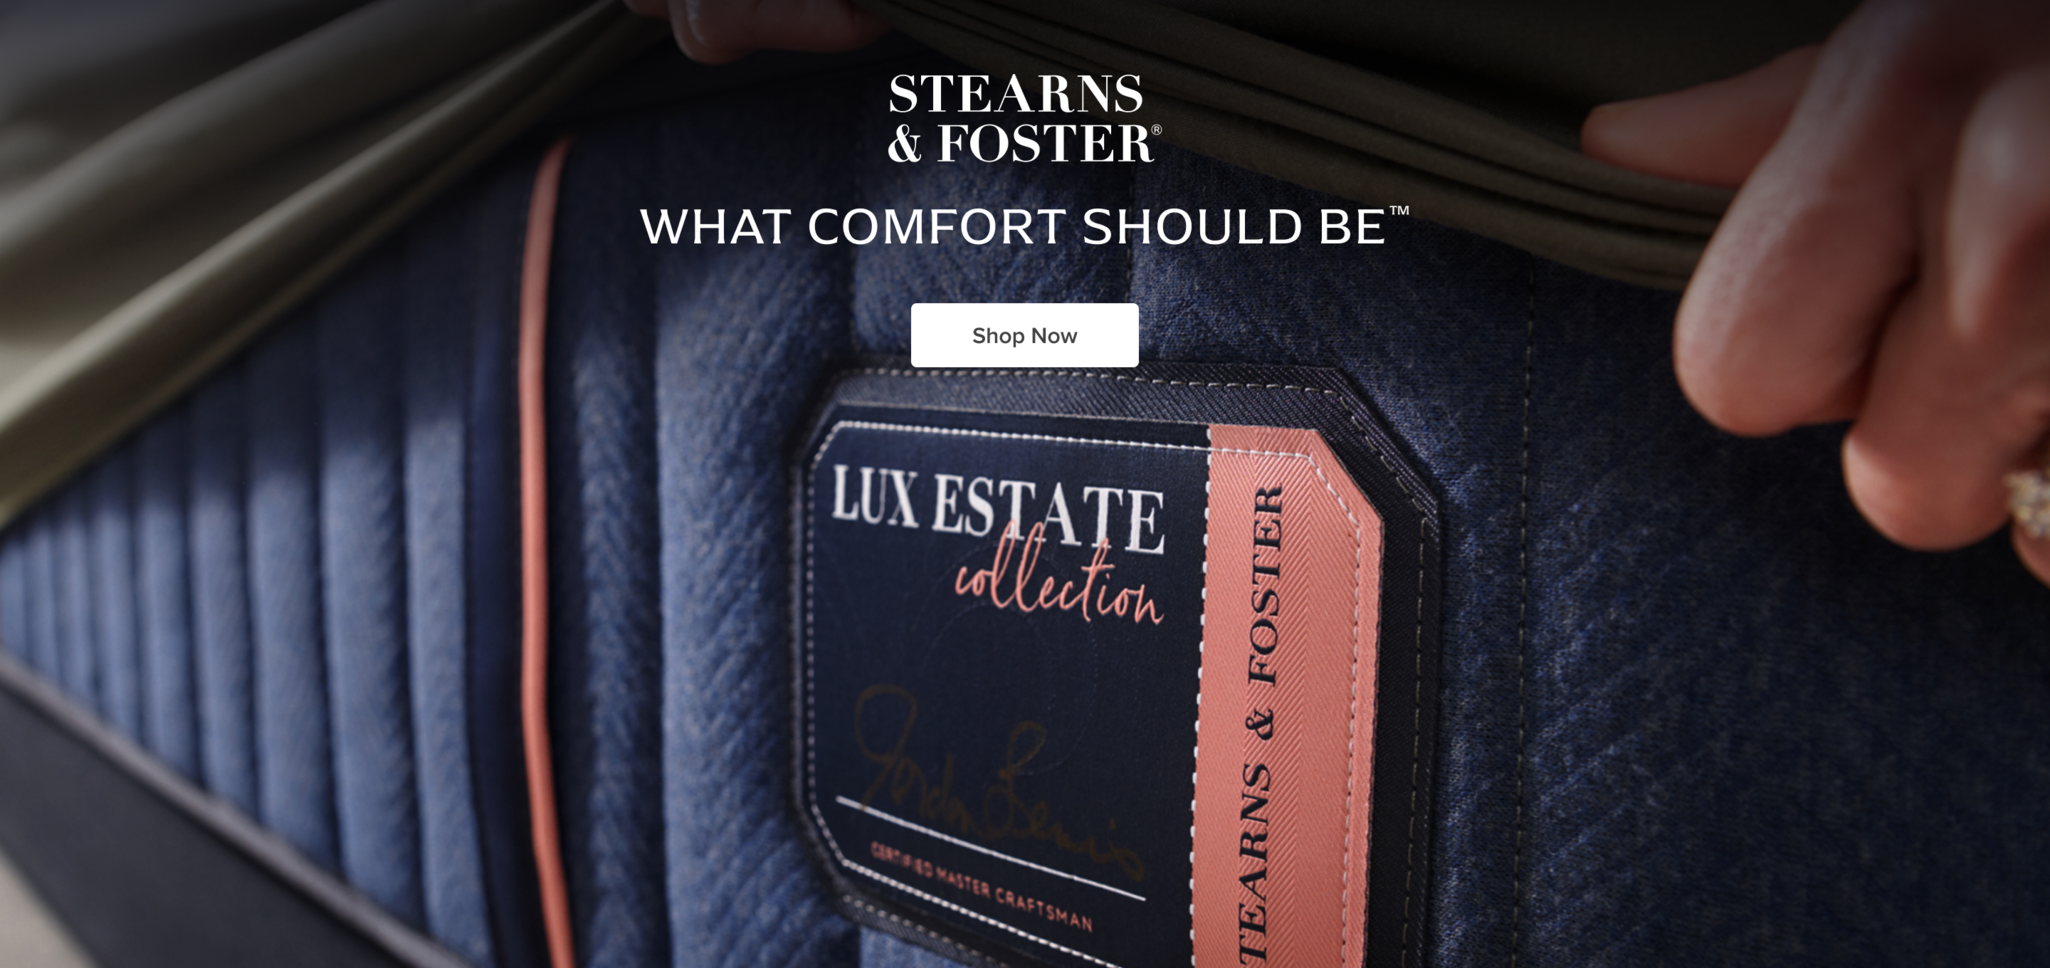 Stearns & Foster What Comfort Should Be - Shop Stearns and Foster Mattresses